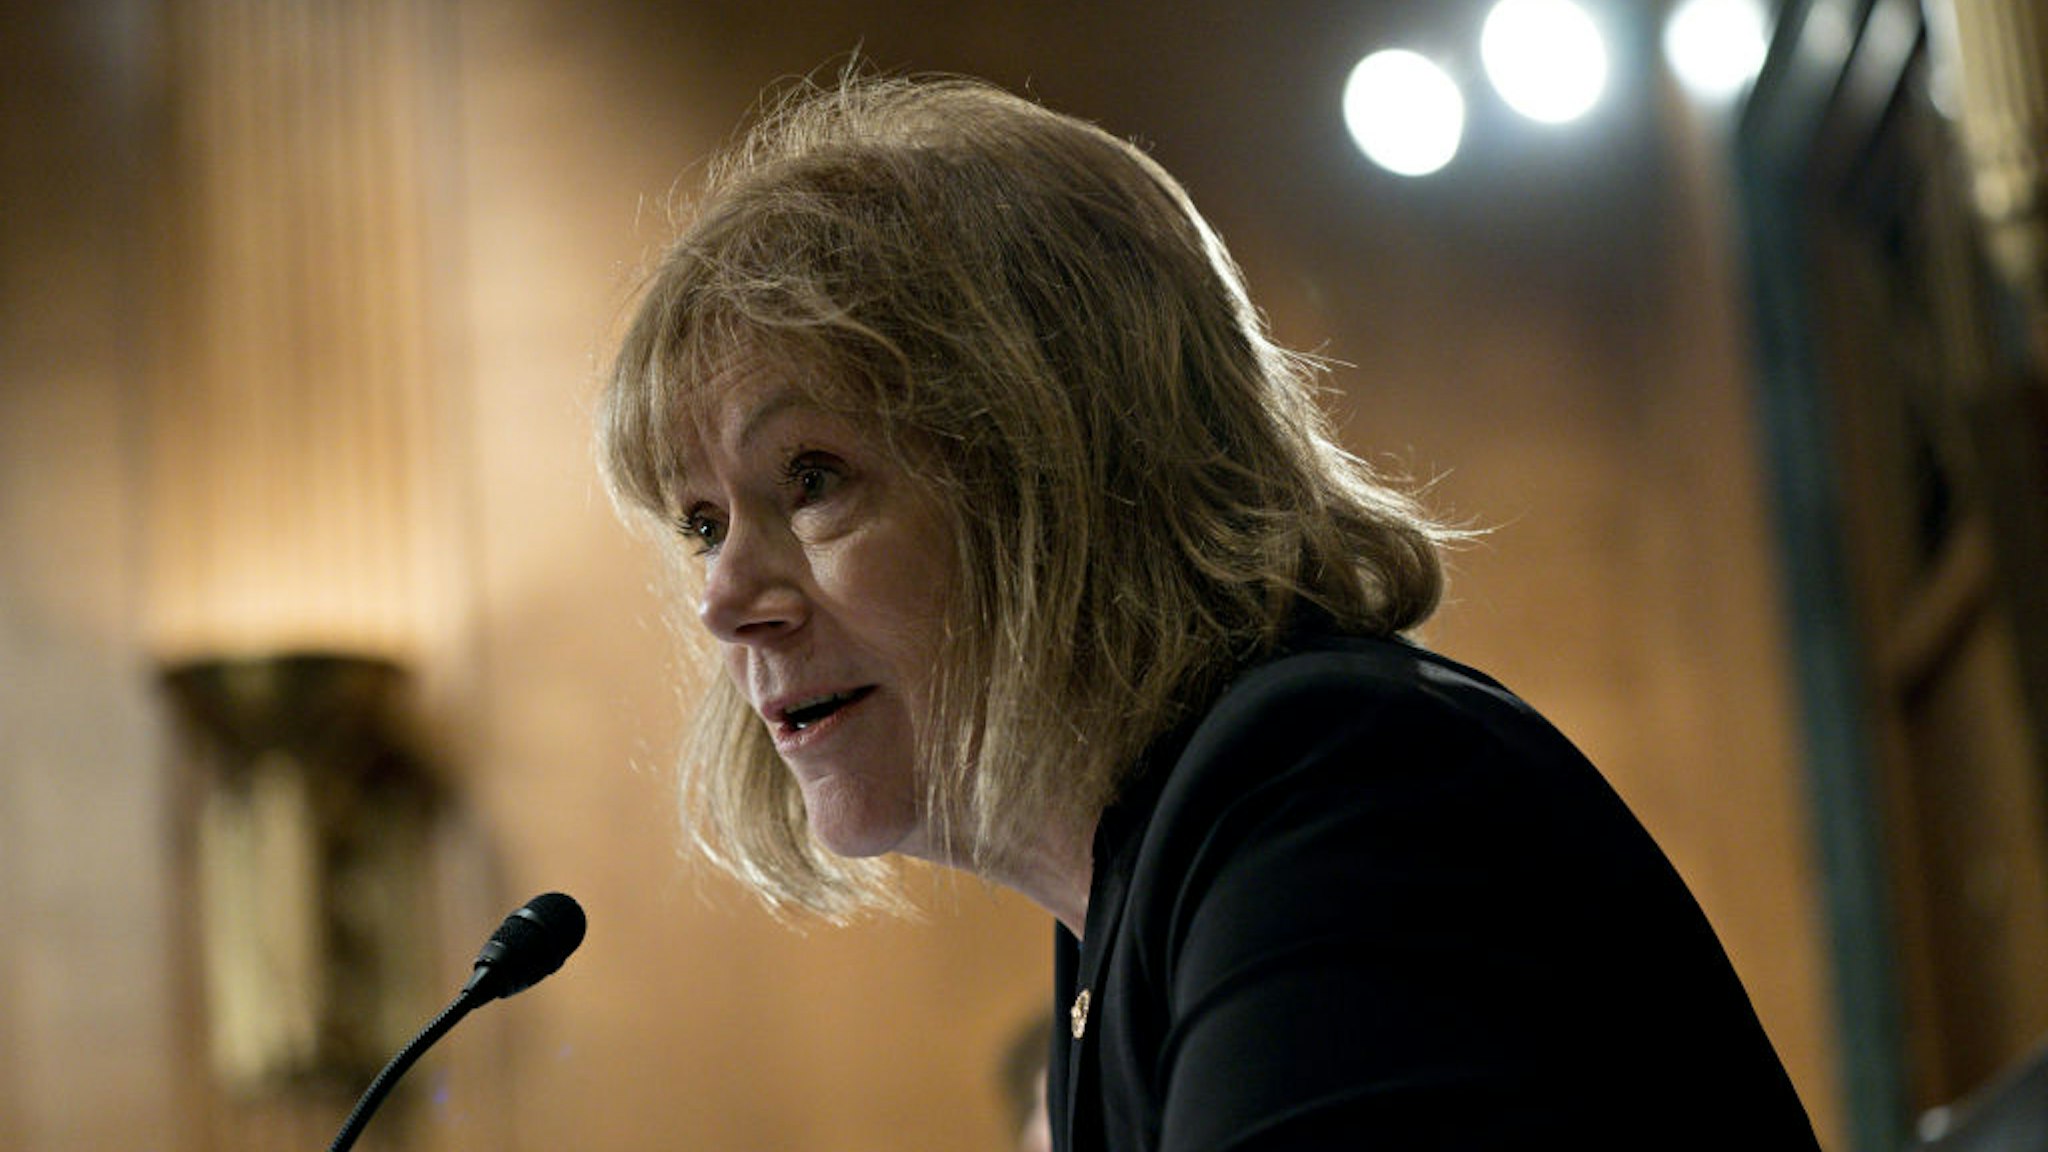 Senator Tina Smith, a Democrat from Minnesota, questions witnesses during a Senate Banking Committee hearing in Washington, D.C., U.S., on Tuesday, Sept. 10, 2019